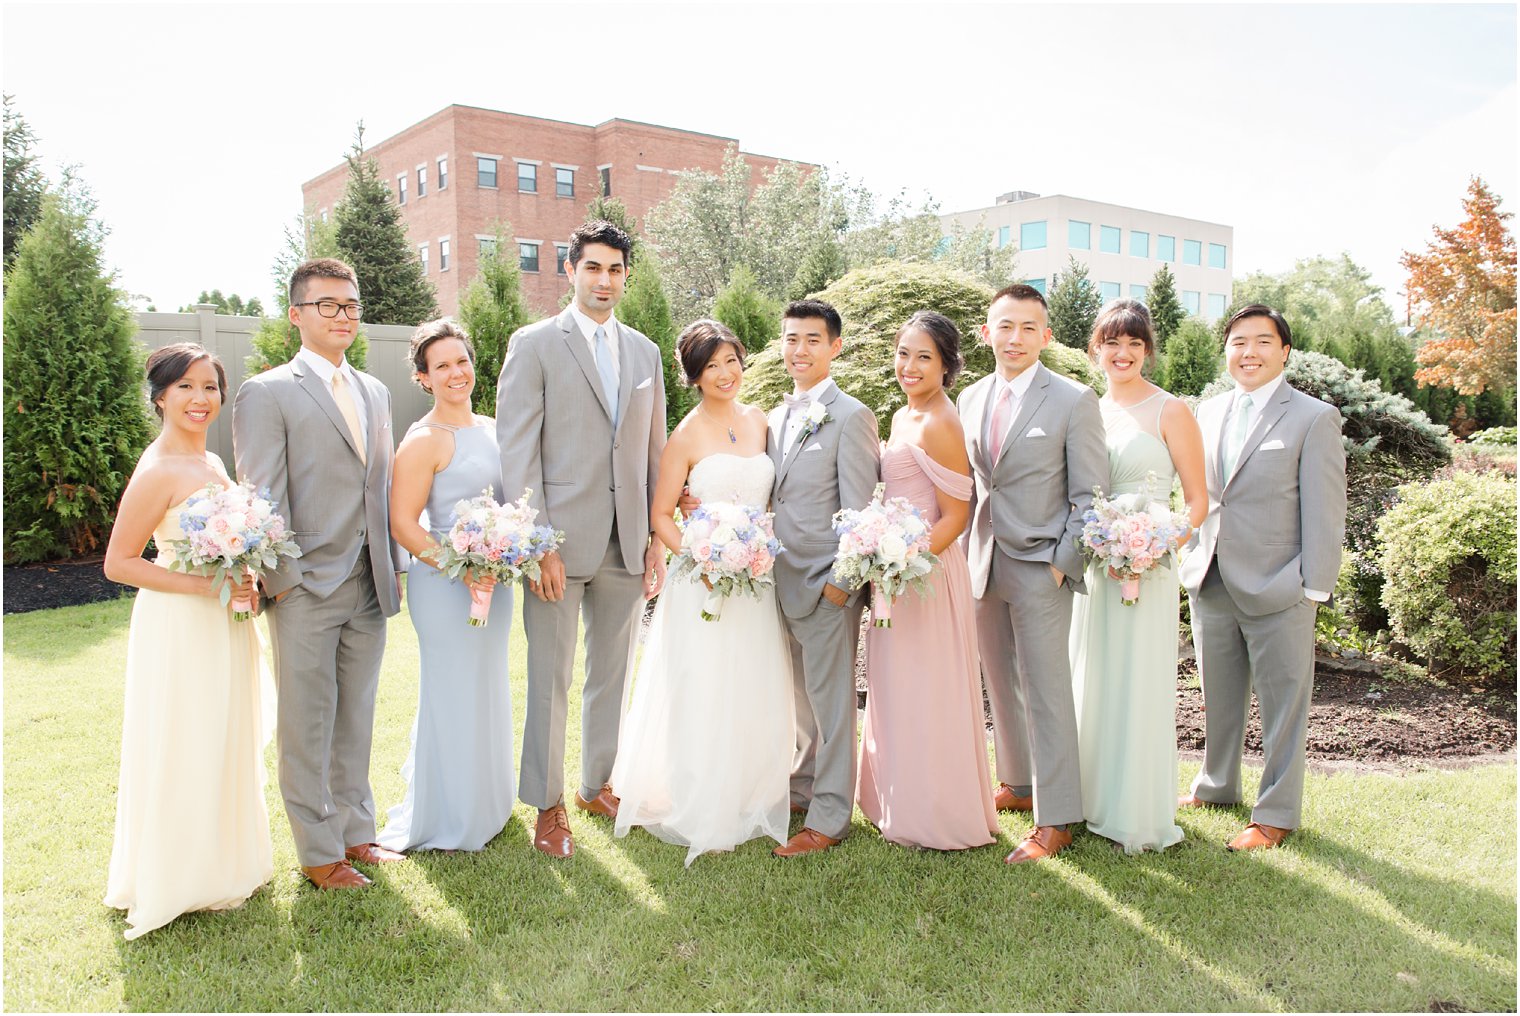 Summer wedding party with light grey suits and pastel gowns at The Bethwood